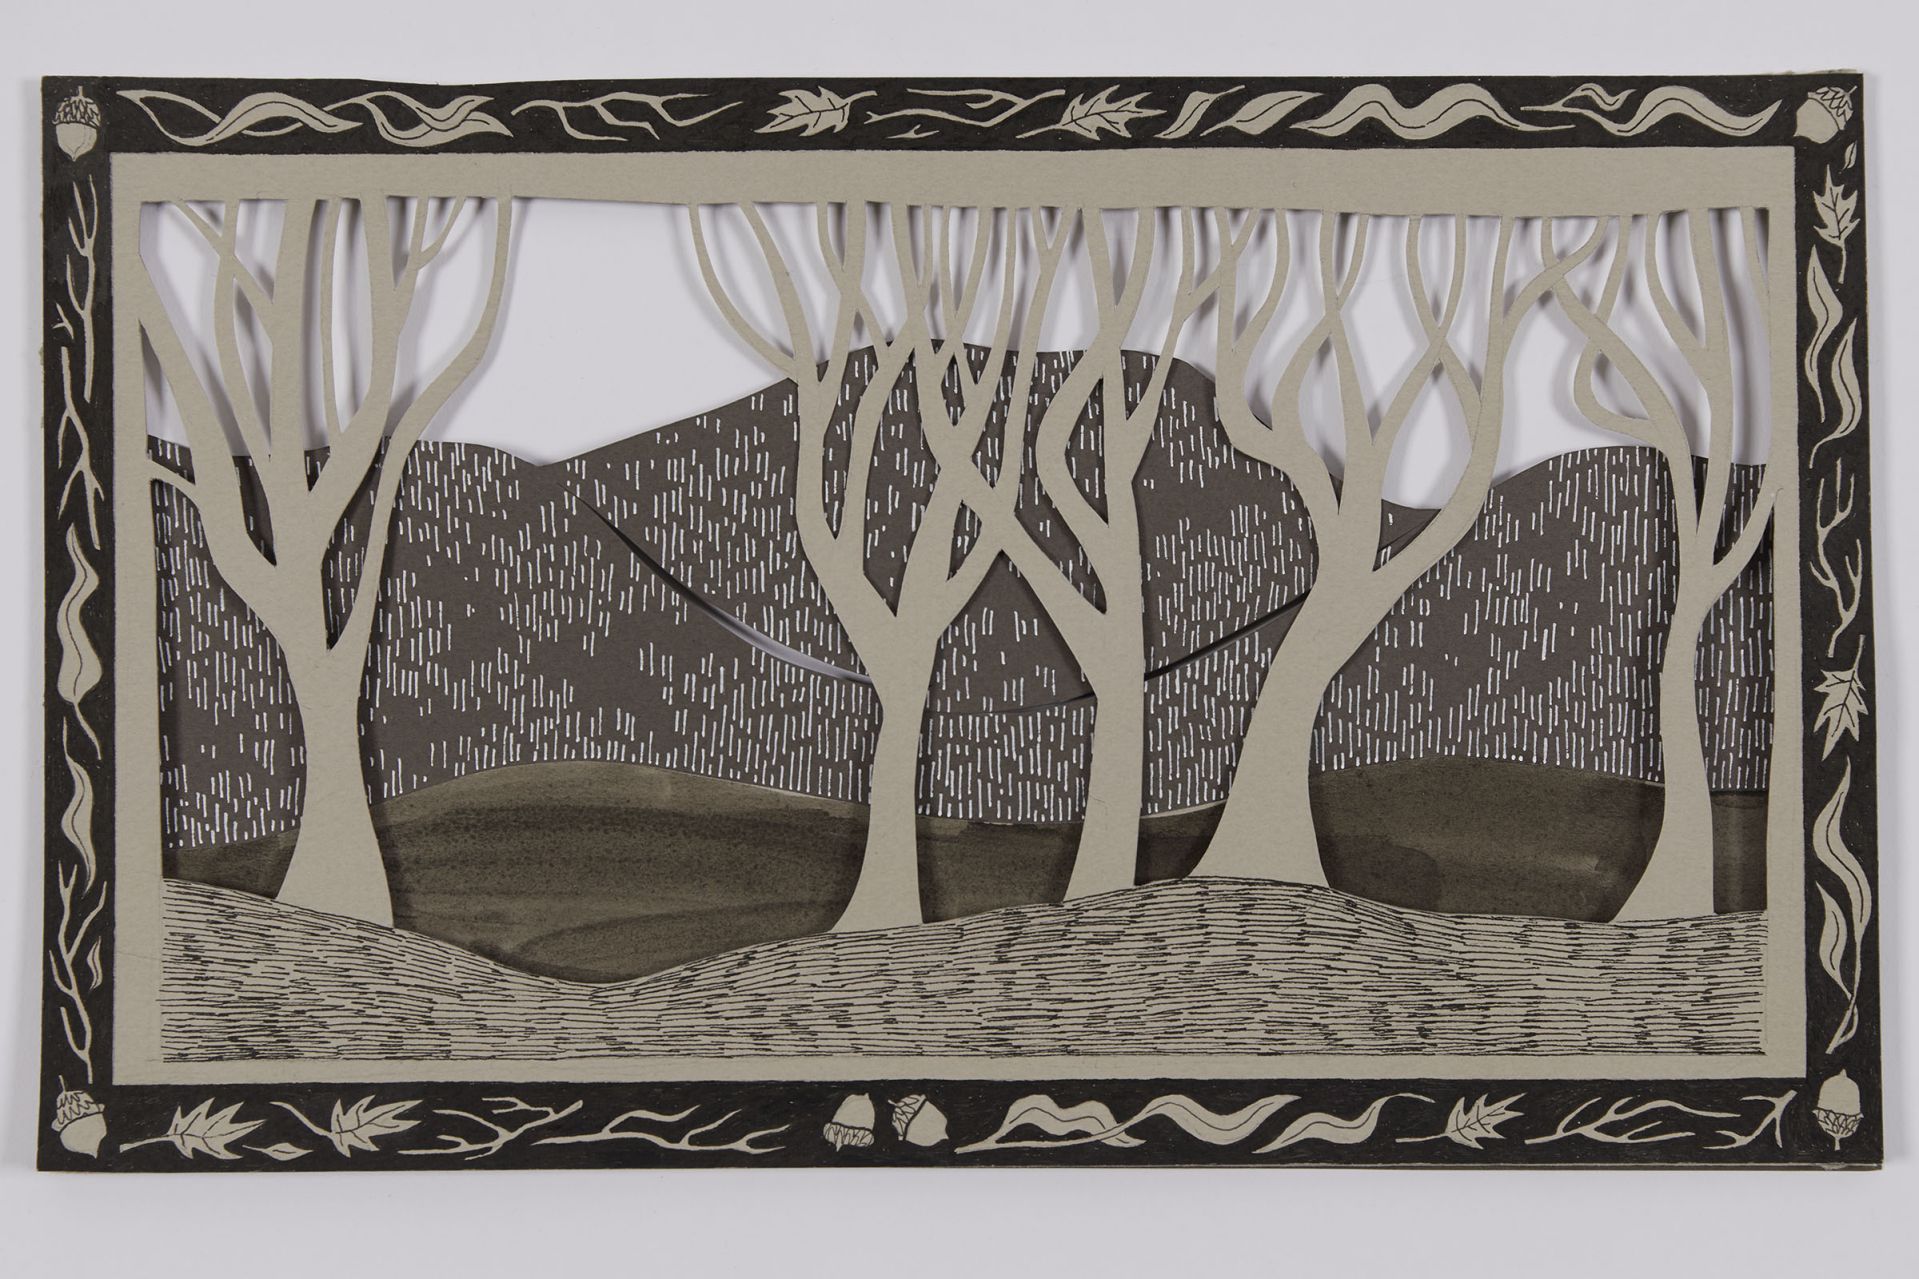 Sophie Gerry, Local Landscape 1, 2020, black ink wash, and black and white pen on toned paper, 12 x 7 inches